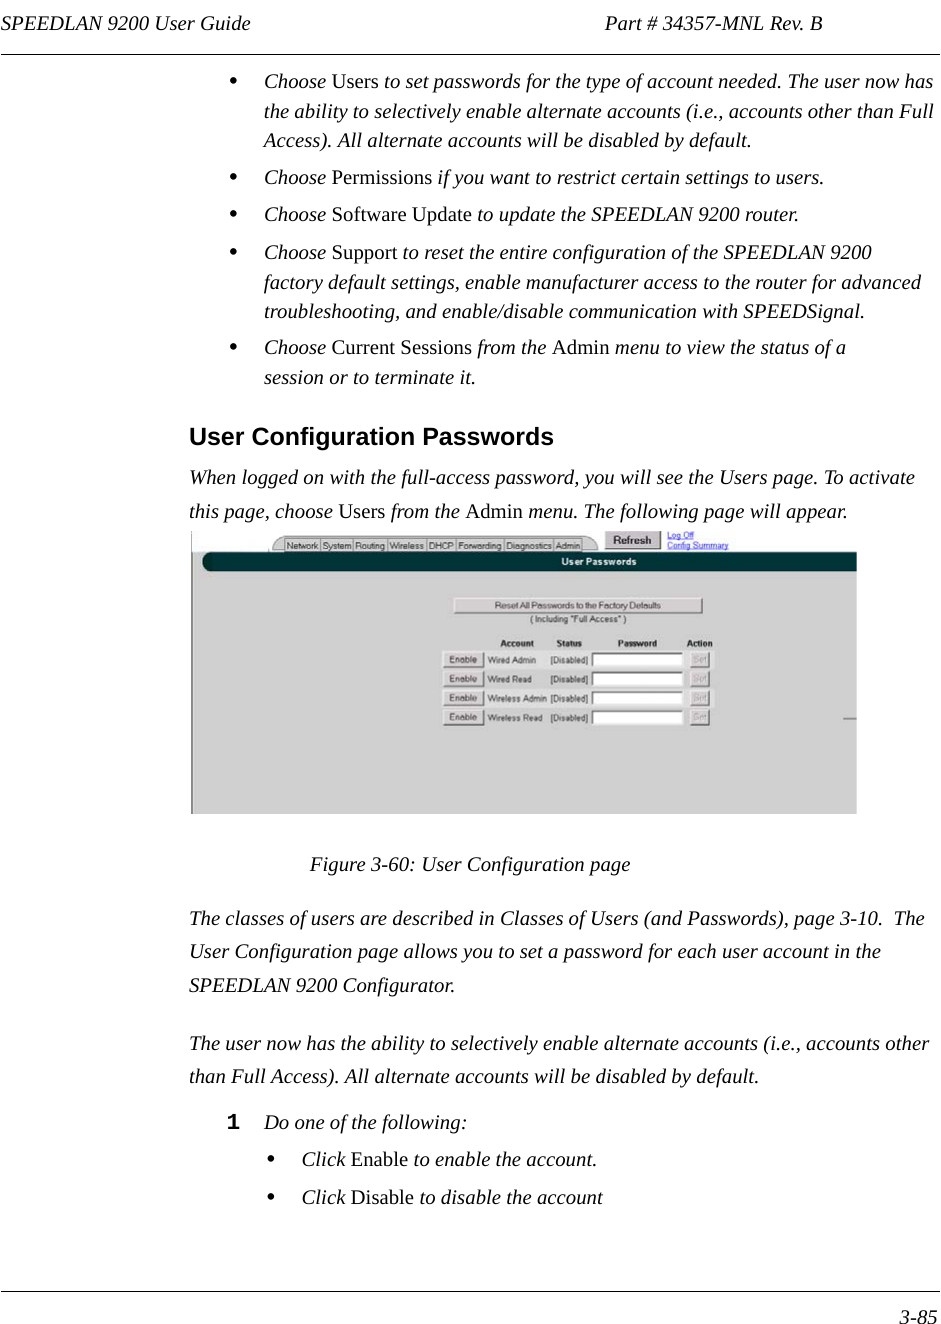 SPEEDLAN 9200 User Guide                                                                    Part # 34357-MNL Rev. B      3-85                                                                                                                                                              •Choose Users to set passwords for the type of account needed. The user now has the ability to selectively enable alternate accounts (i.e., accounts other than Full Access). All alternate accounts will be disabled by default.•Choose Permissions if you want to restrict certain settings to users.•Choose Software Update to update the SPEEDLAN 9200 router.•Choose Support to reset the entire configuration of the SPEEDLAN 9200 factory default settings, enable manufacturer access to the router for advanced troubleshooting, and enable/disable communication with SPEEDSignal. •Choose Current Sessions from the Admin menu to view the status of a session or to terminate it.User Configuration PasswordsWhen logged on with the full-access password, you will see the Users page. To activate this page, choose Users from the Admin menu. The following page will appear.Figure 3-60: User Configuration pageThe classes of users are described in Classes of Users (and Passwords), page 3-10.  The User Configuration page allows you to set a password for each user account in the SPEEDLAN 9200 Configurator.  The user now has the ability to selectively enable alternate accounts (i.e., accounts other than Full Access). All alternate accounts will be disabled by default.1Do one of the following:•Click Enable to enable the account.•Click Disable to disable the account